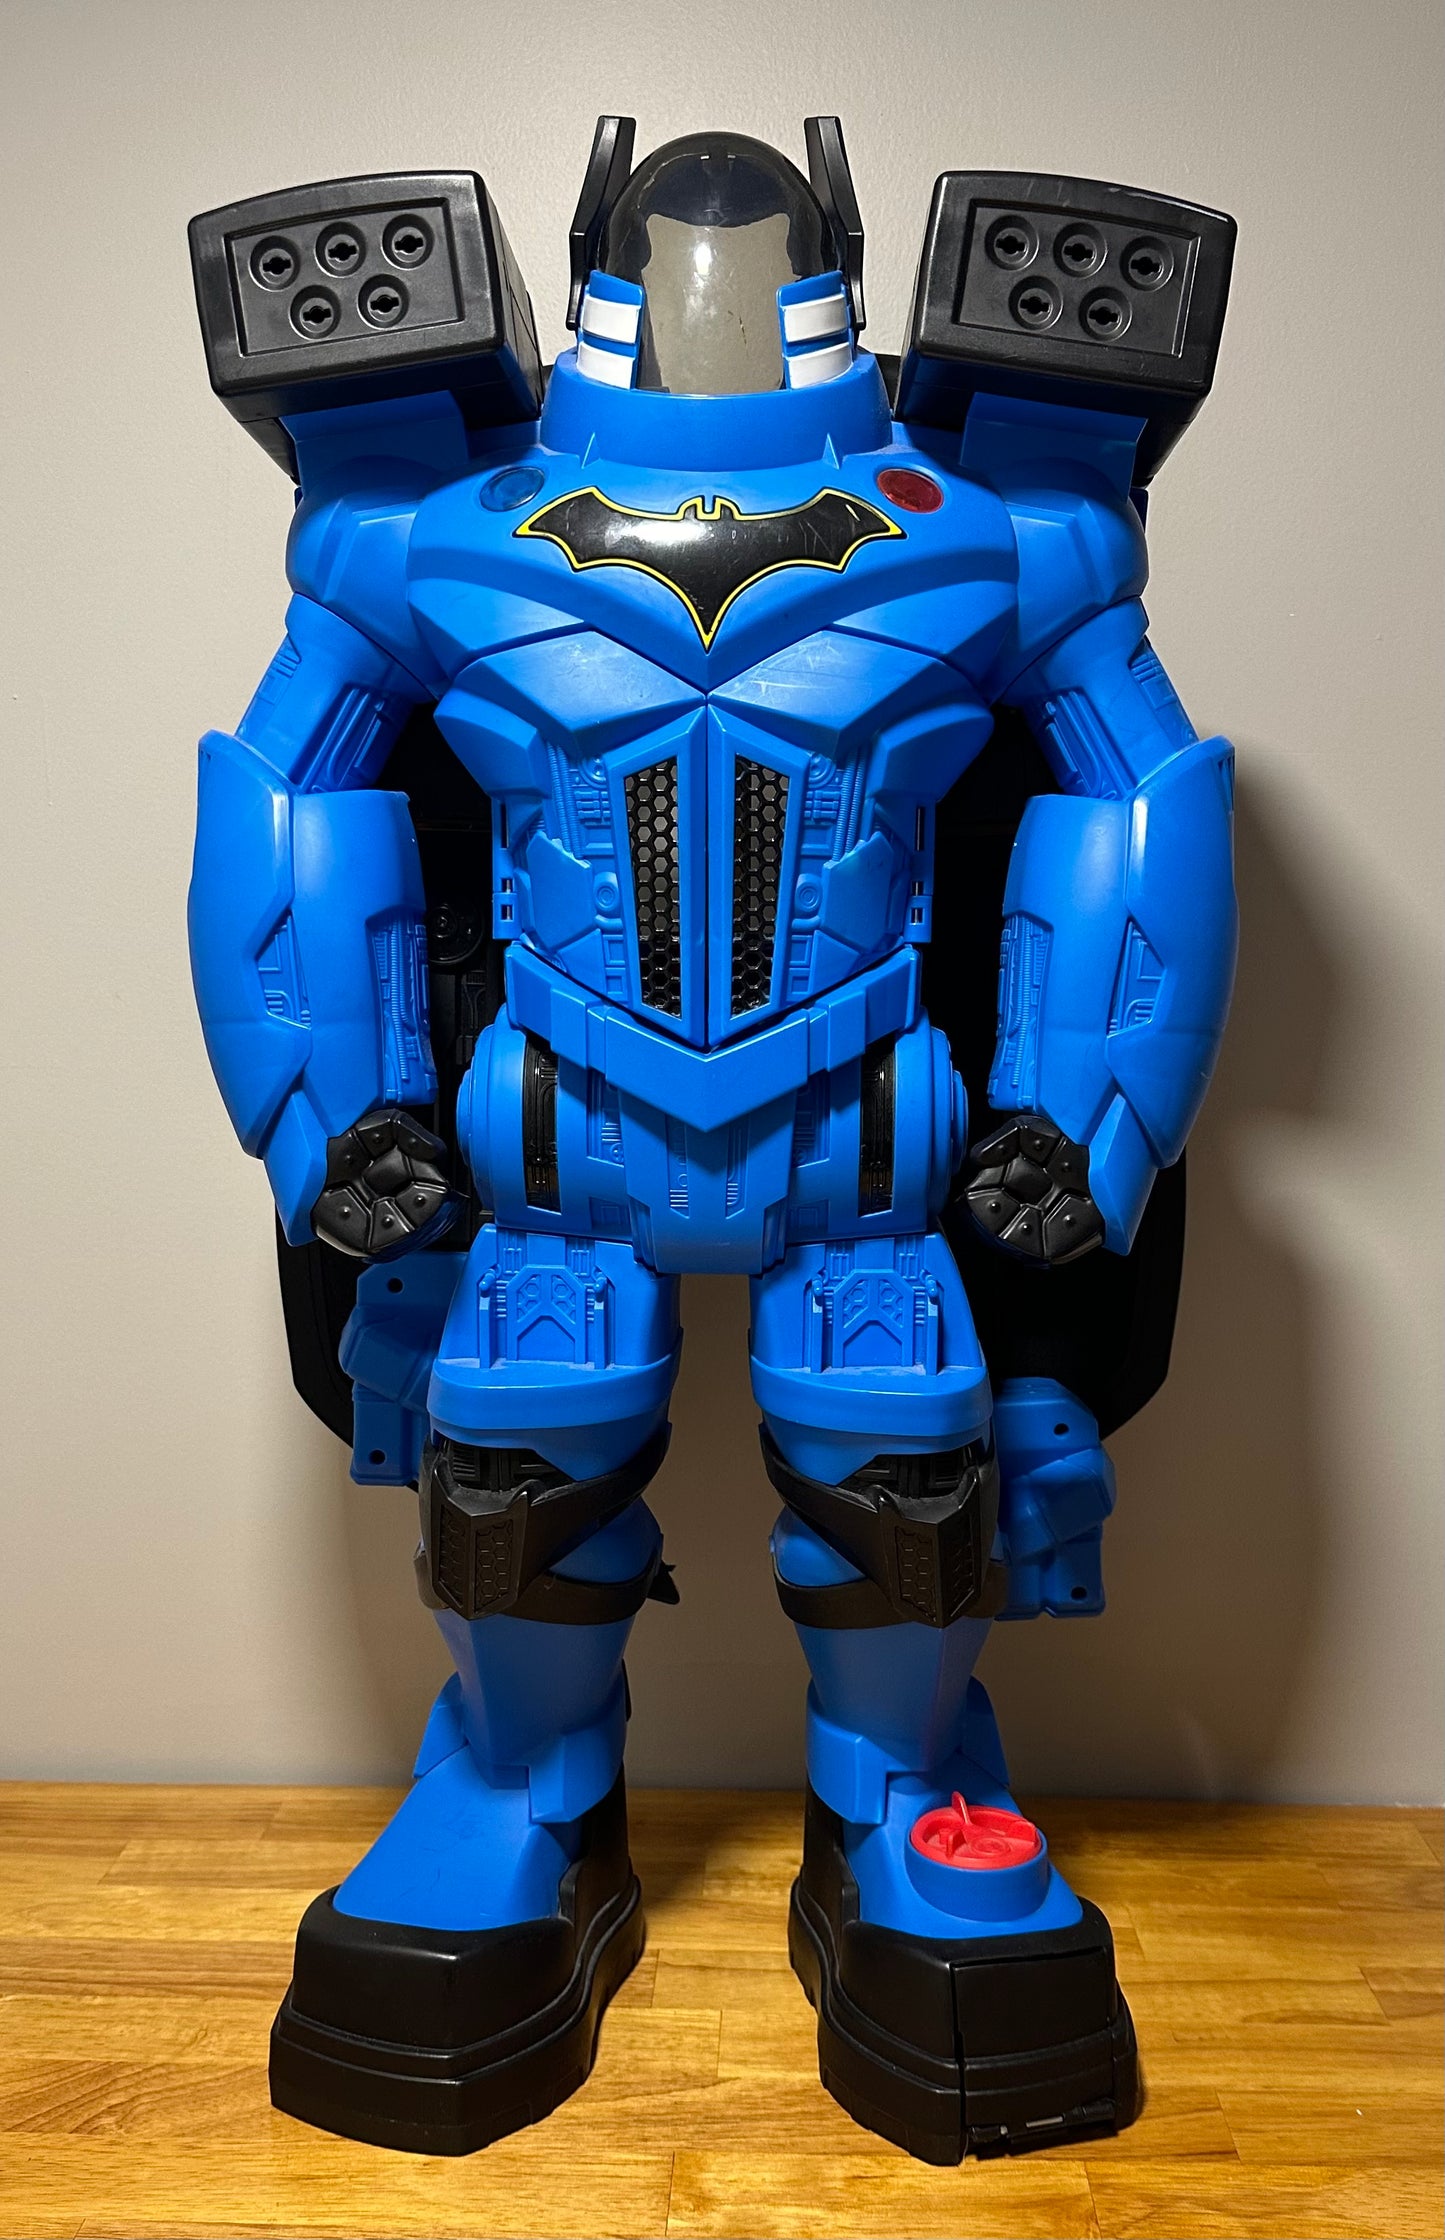 Fisher-Price Imaginext DC Super Friends Batbot Xtreme - over 2' tall!